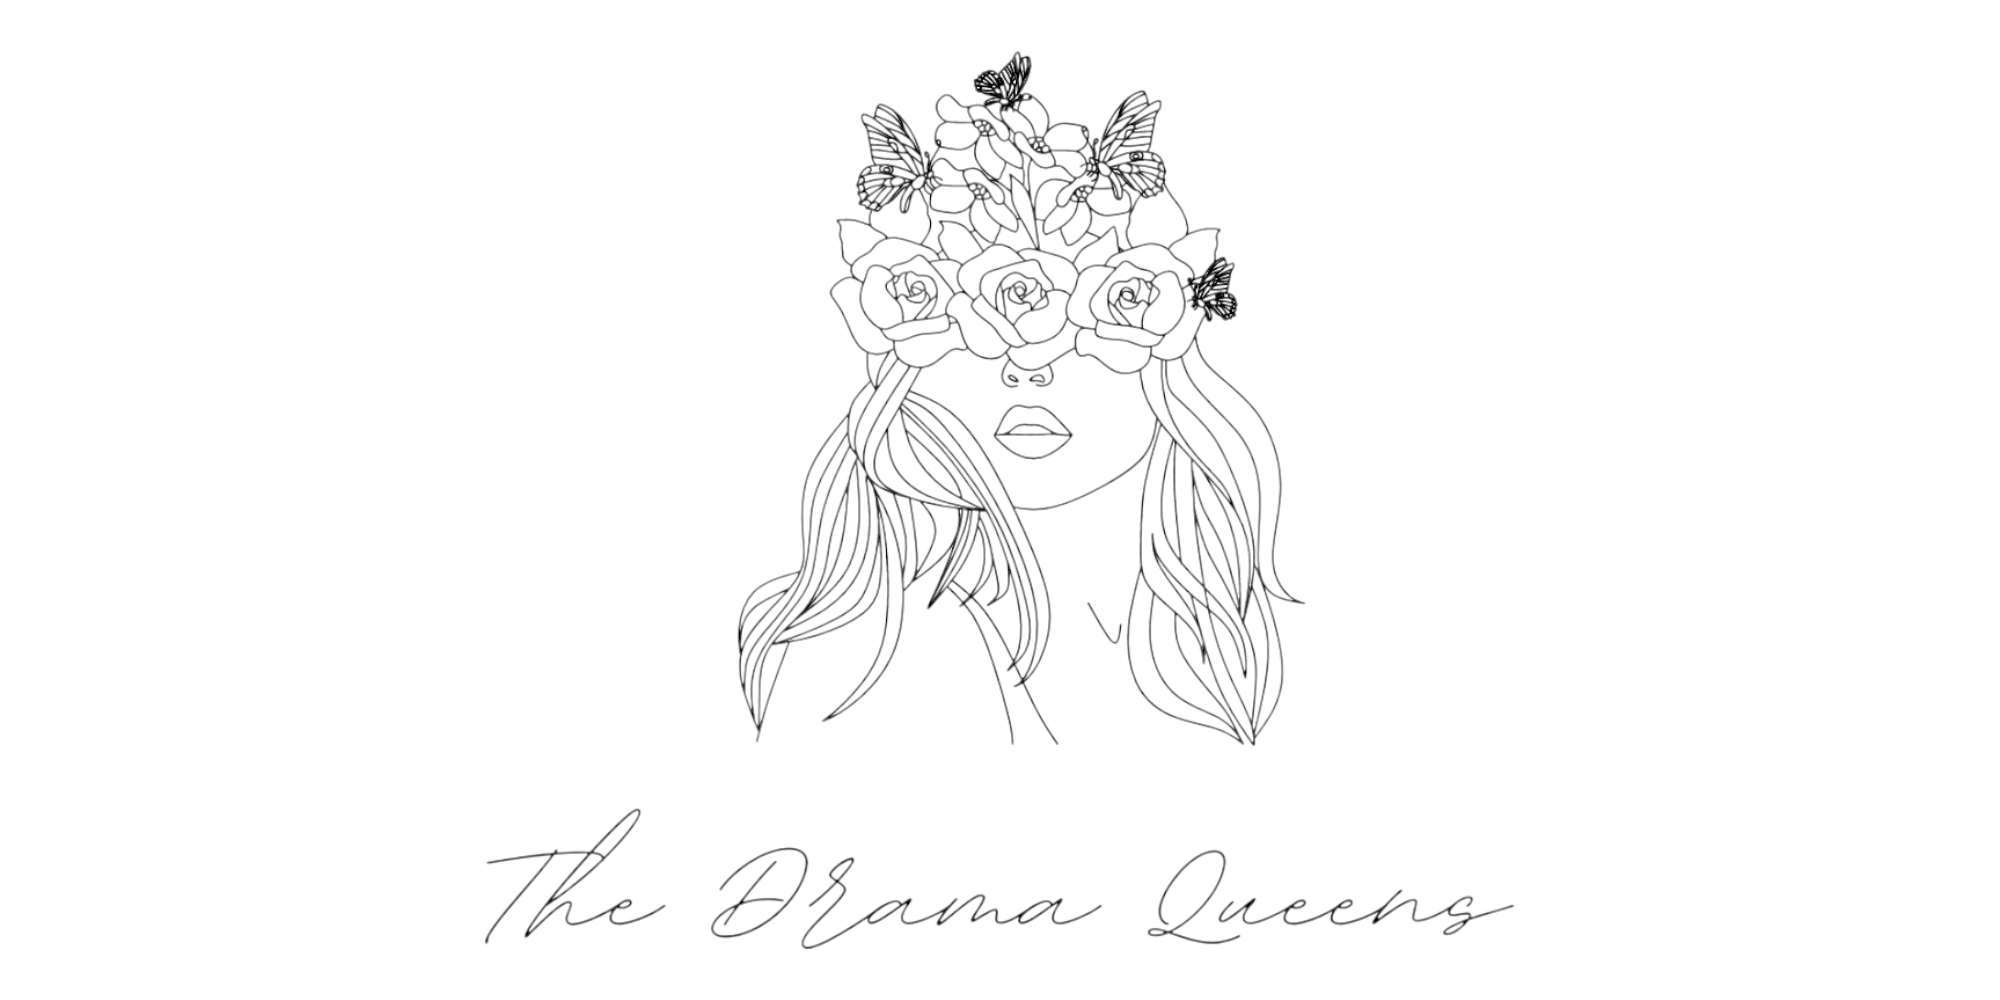 Our Story – The Drama Queens